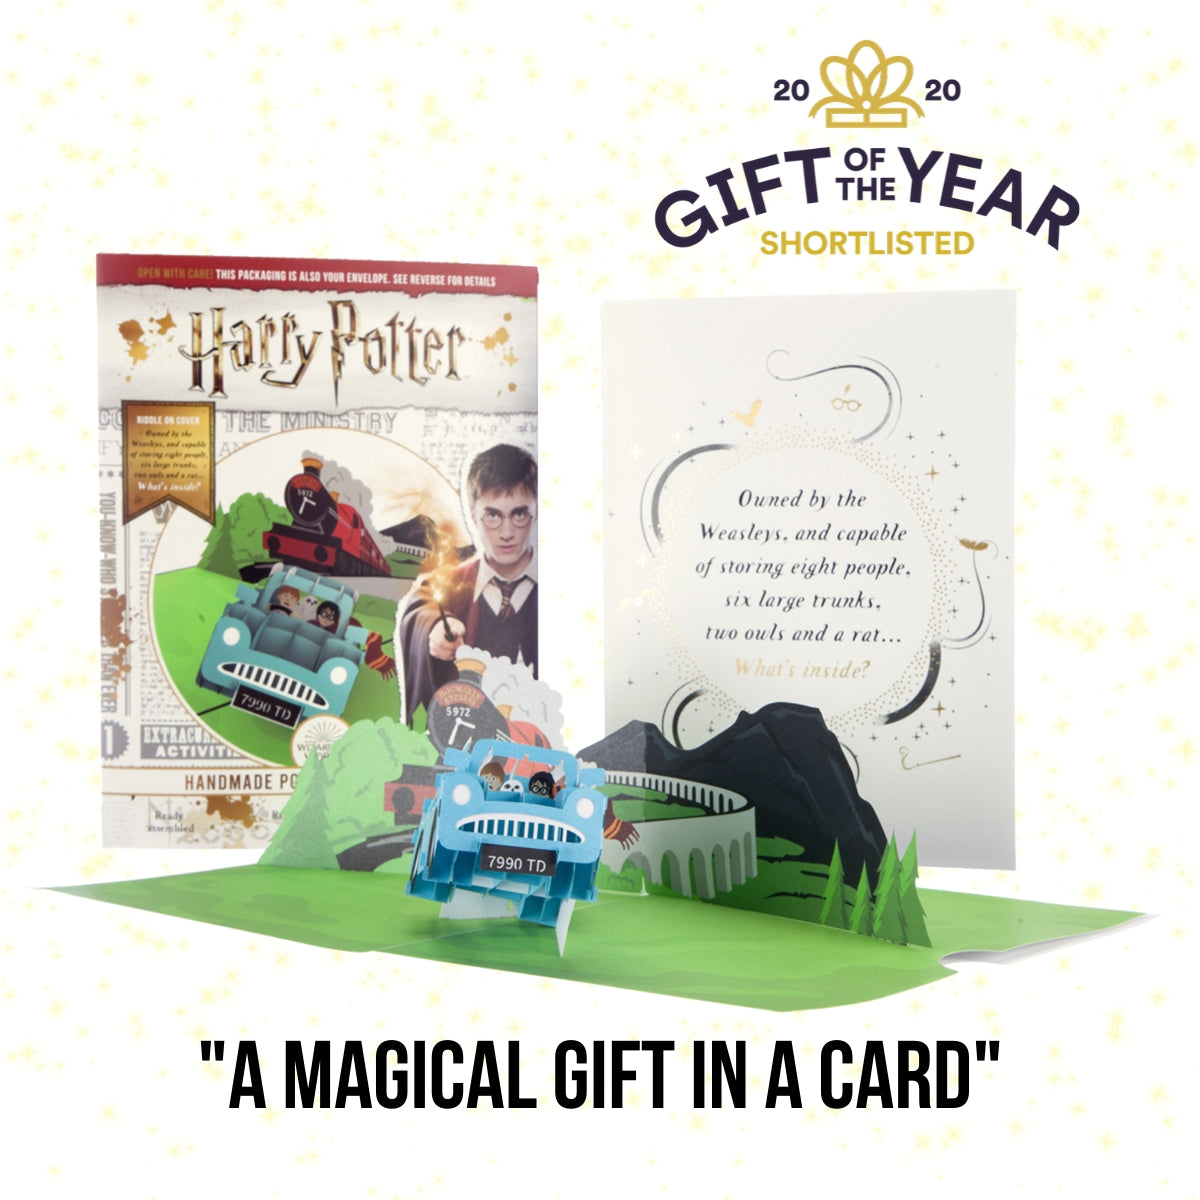 Image of Harry Potter 'Flying Ford Anglia' 3D Birthday Card with Cover and Packaging displayed behind